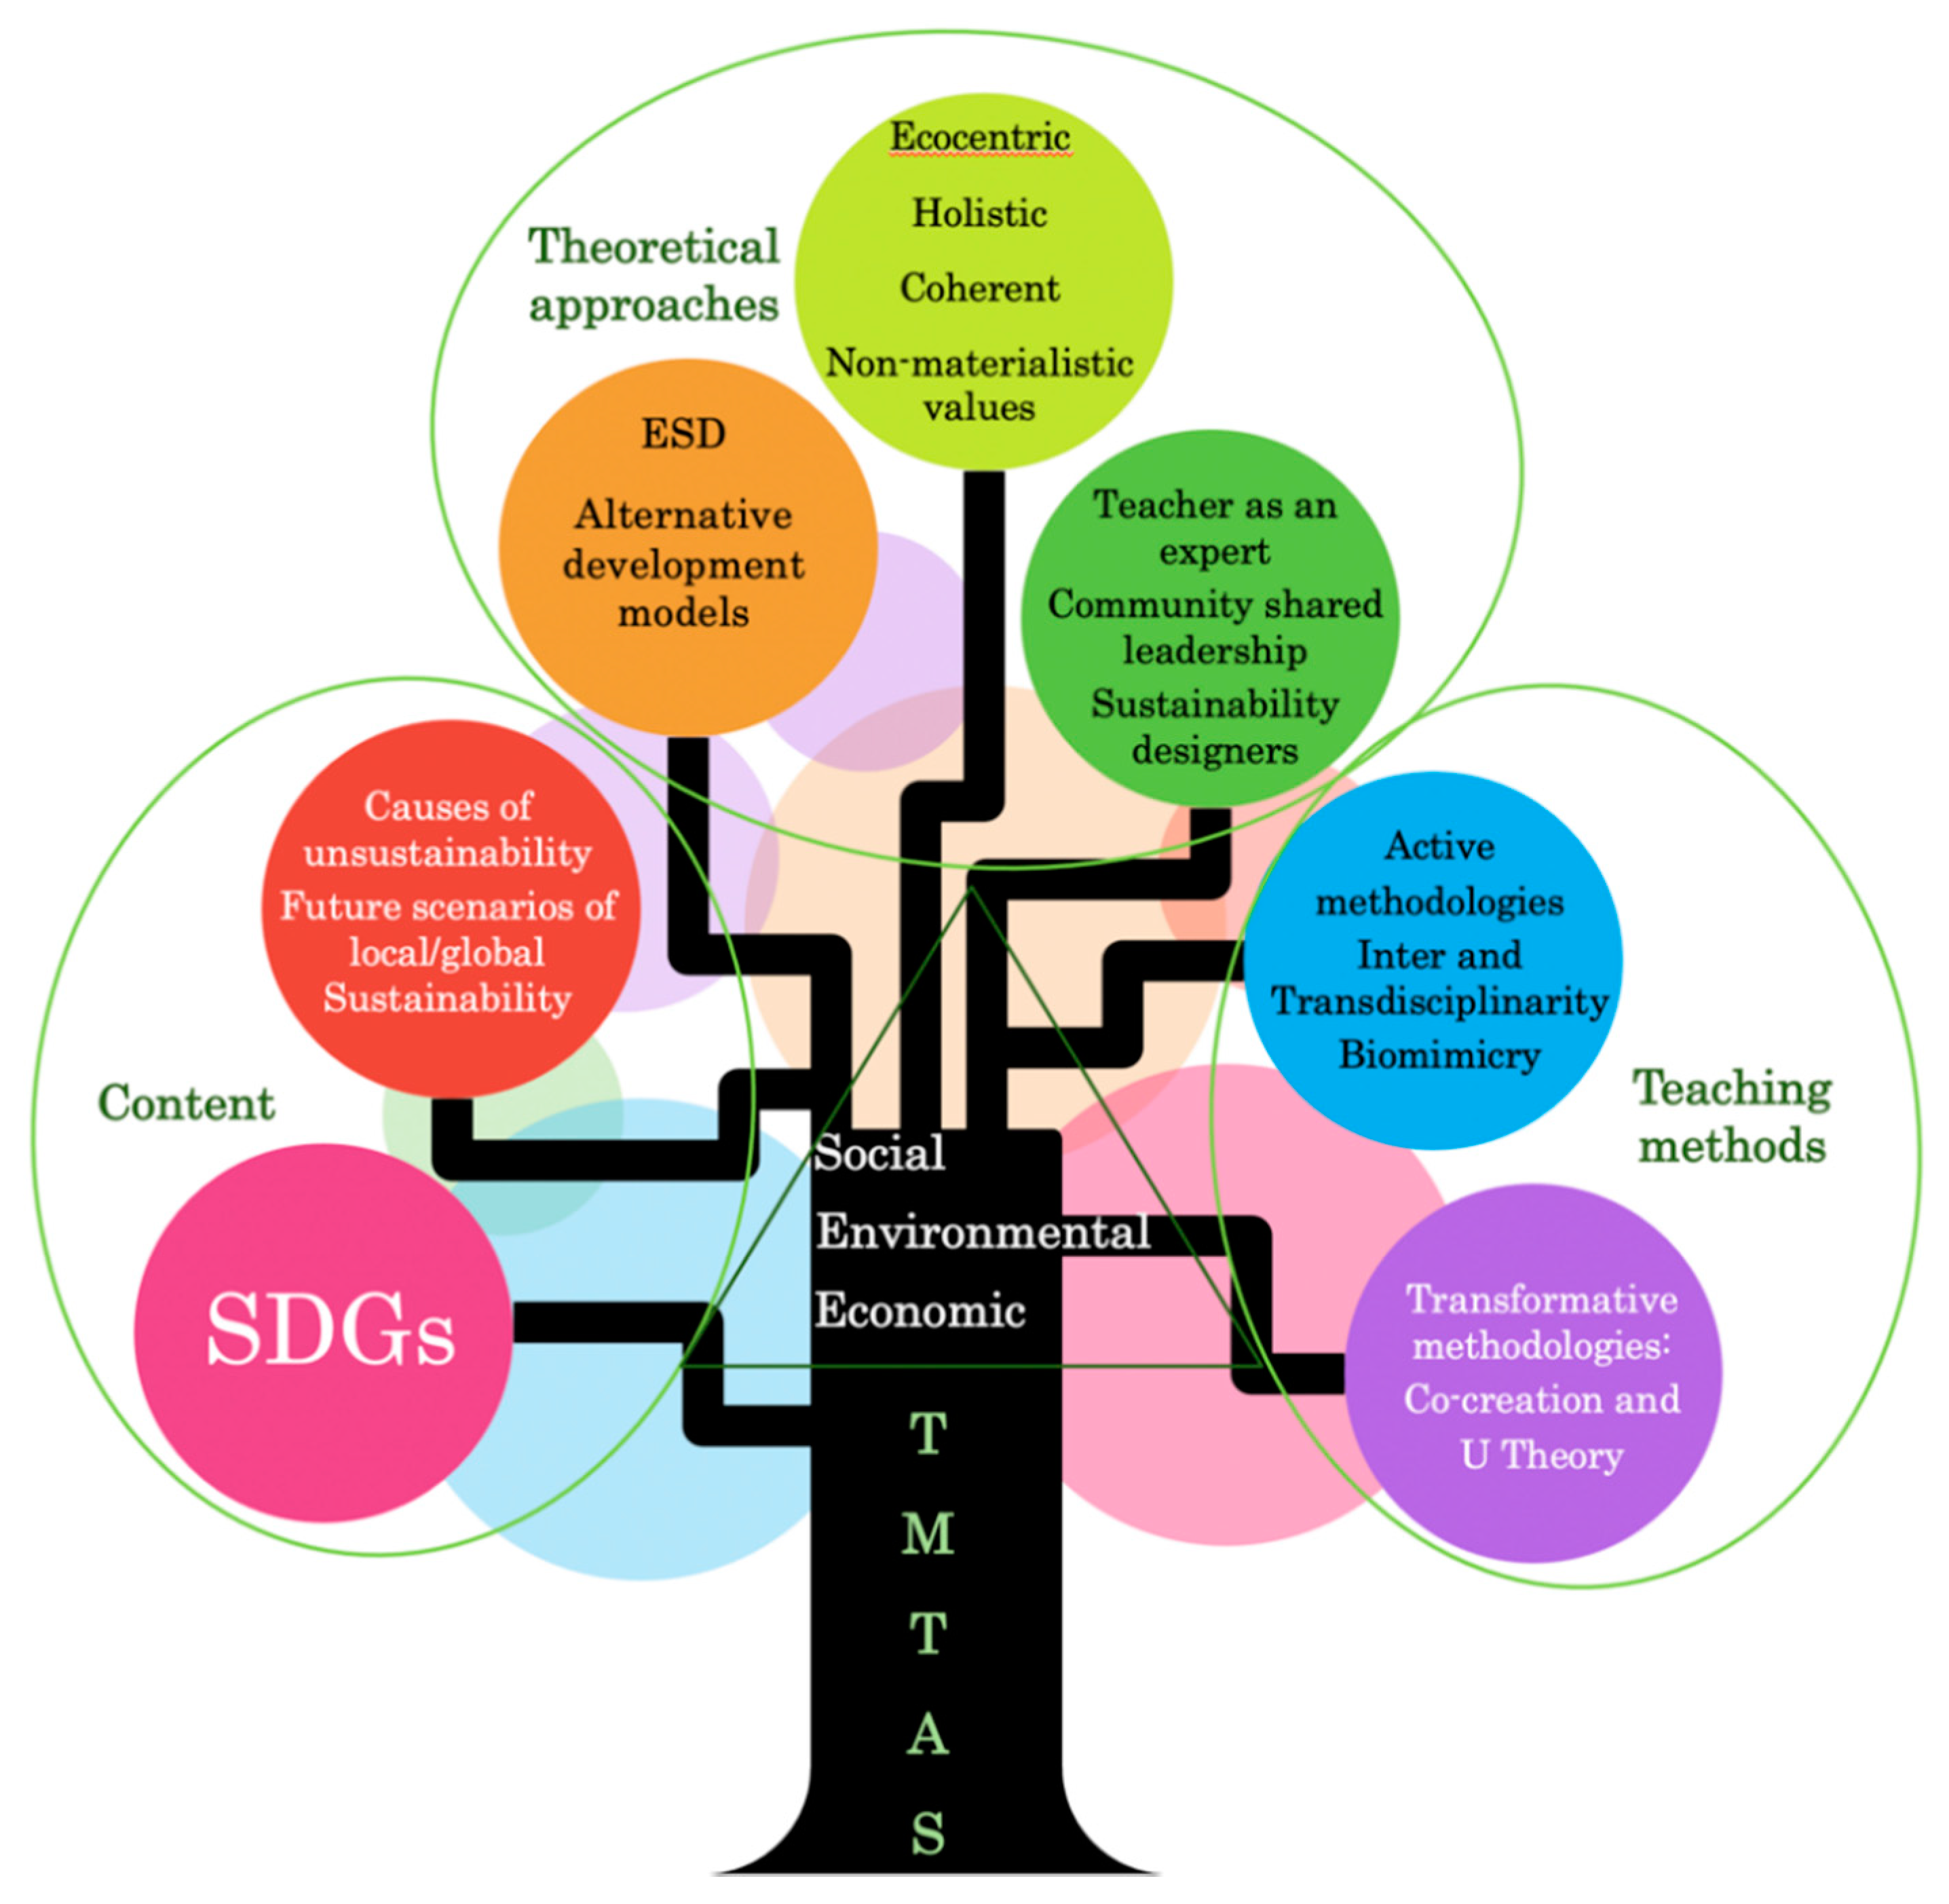 I. The Importance of Integrating Sustainability into Education Curricula